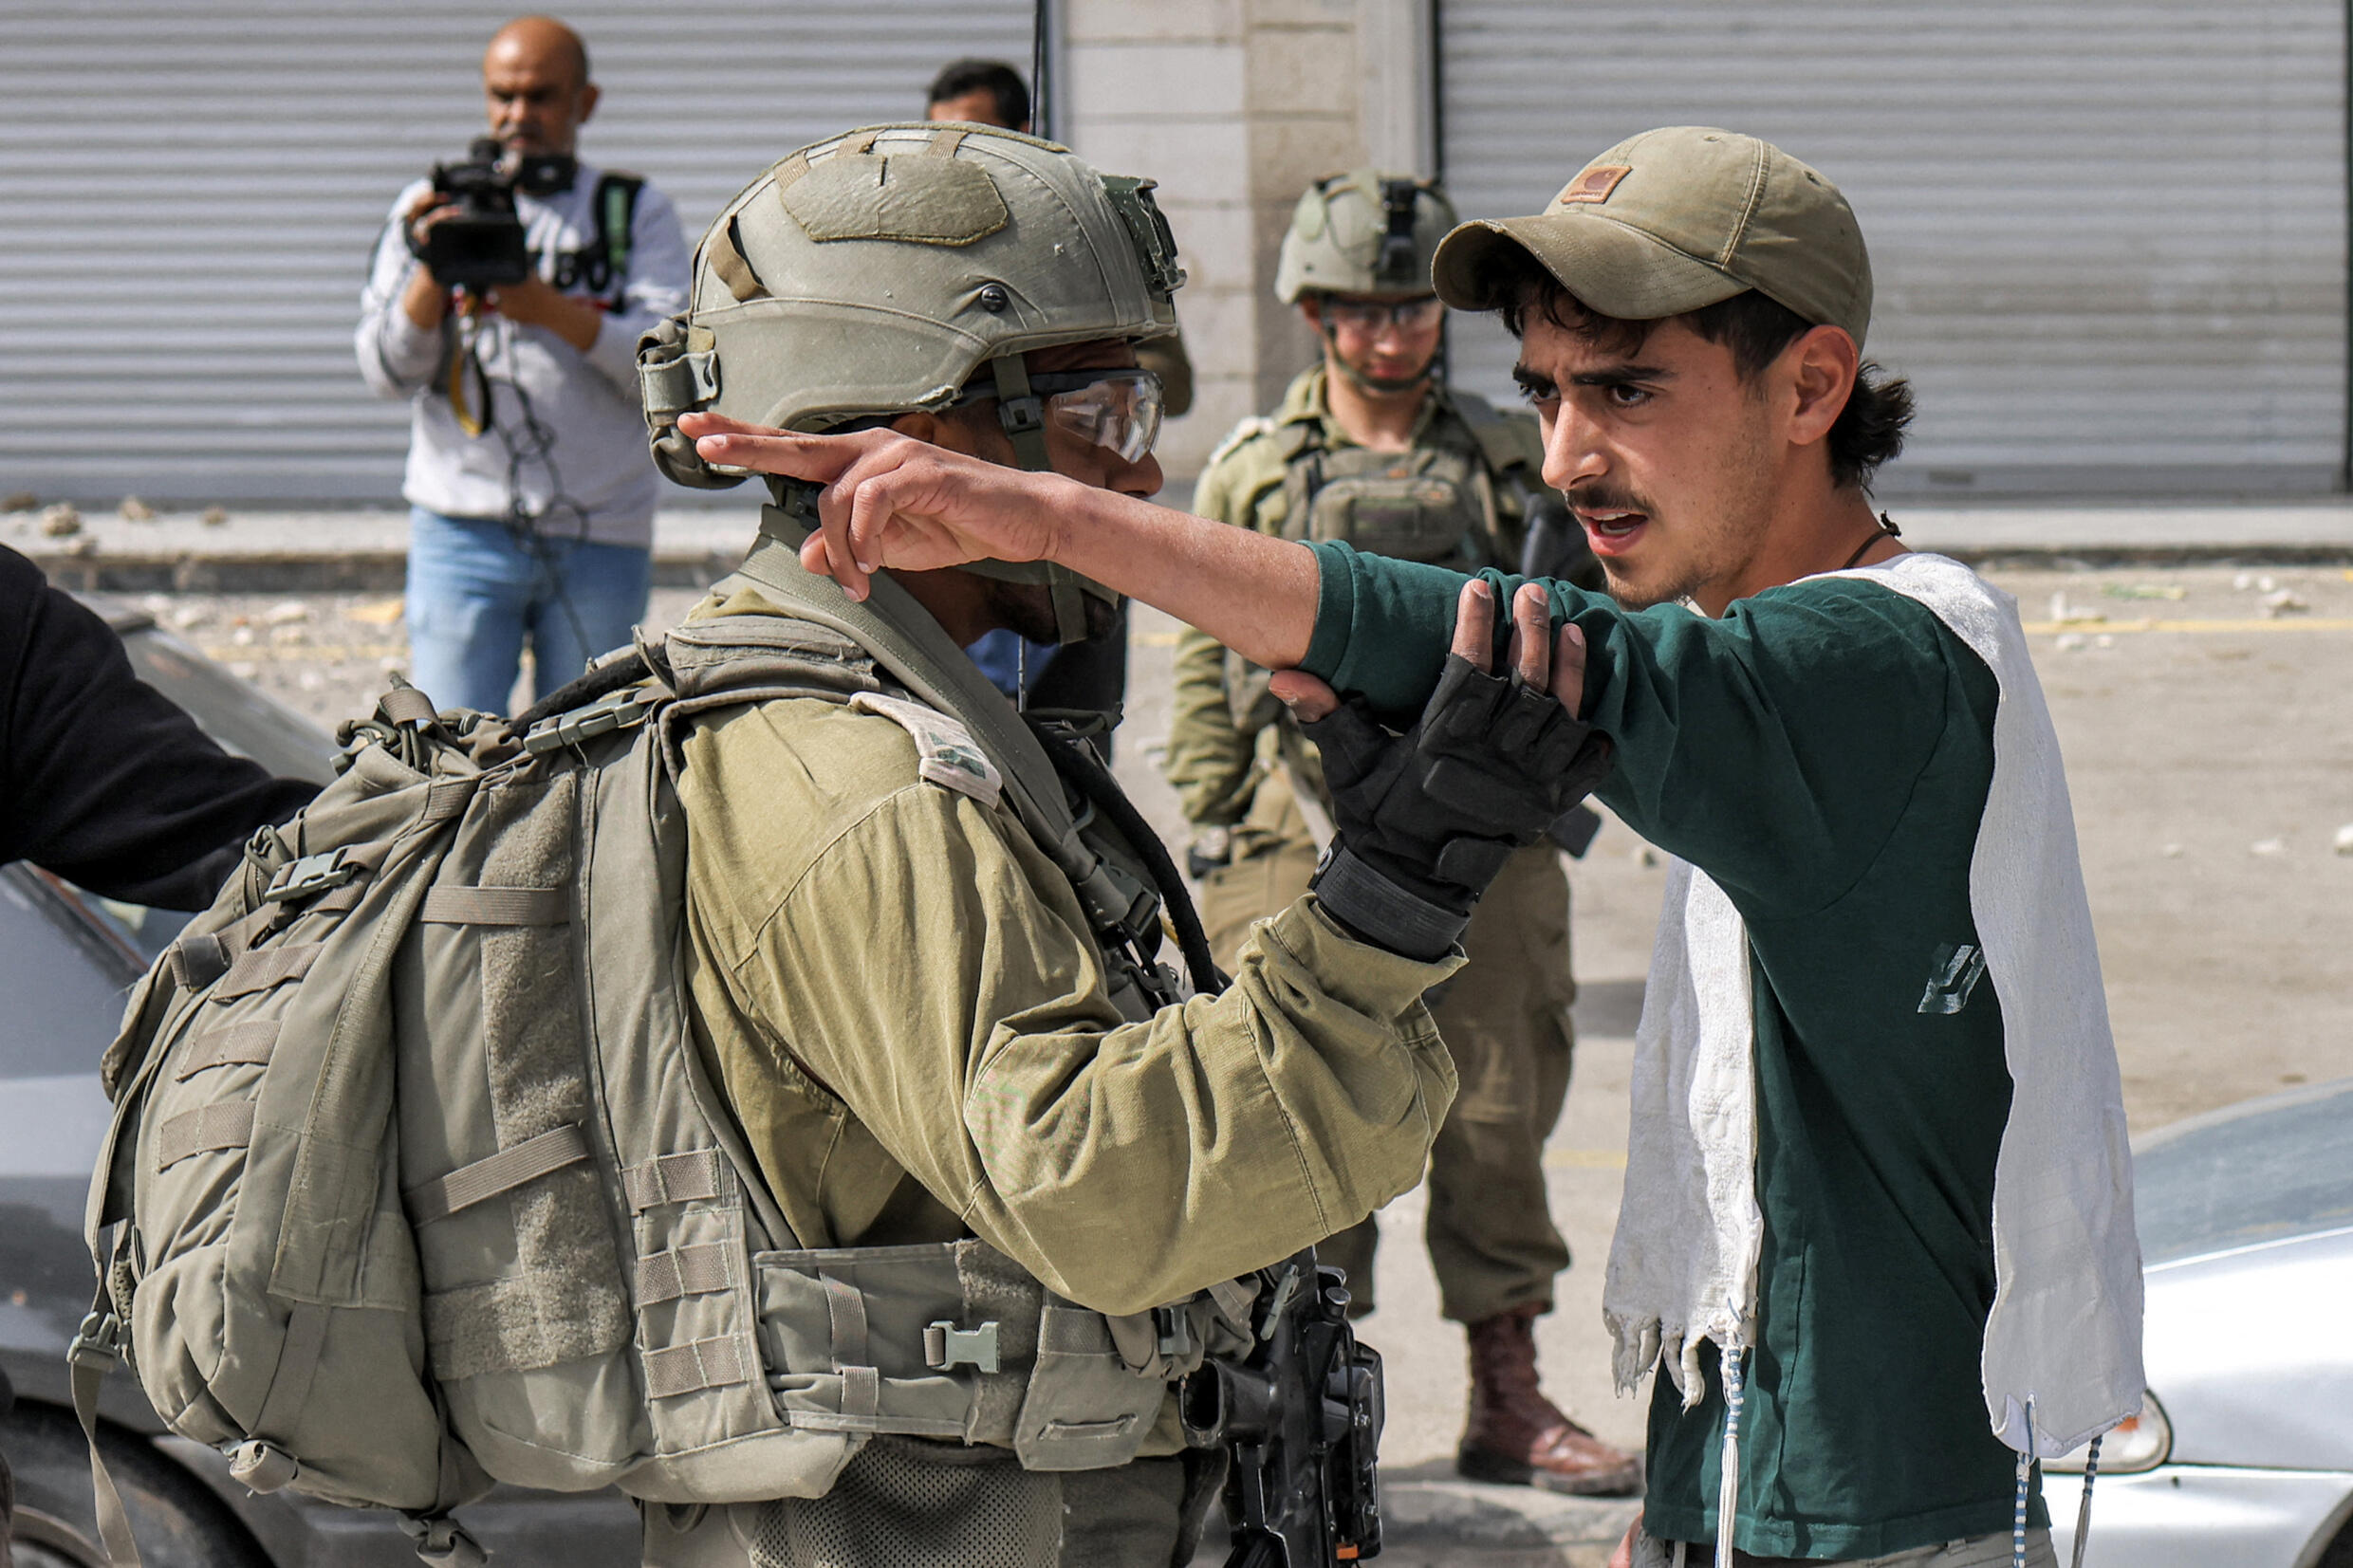 An Israeli soldier speaks with an Israeli settler in the town of Huwara near Nablus in the occupied West Bank, on February 27, 2023.